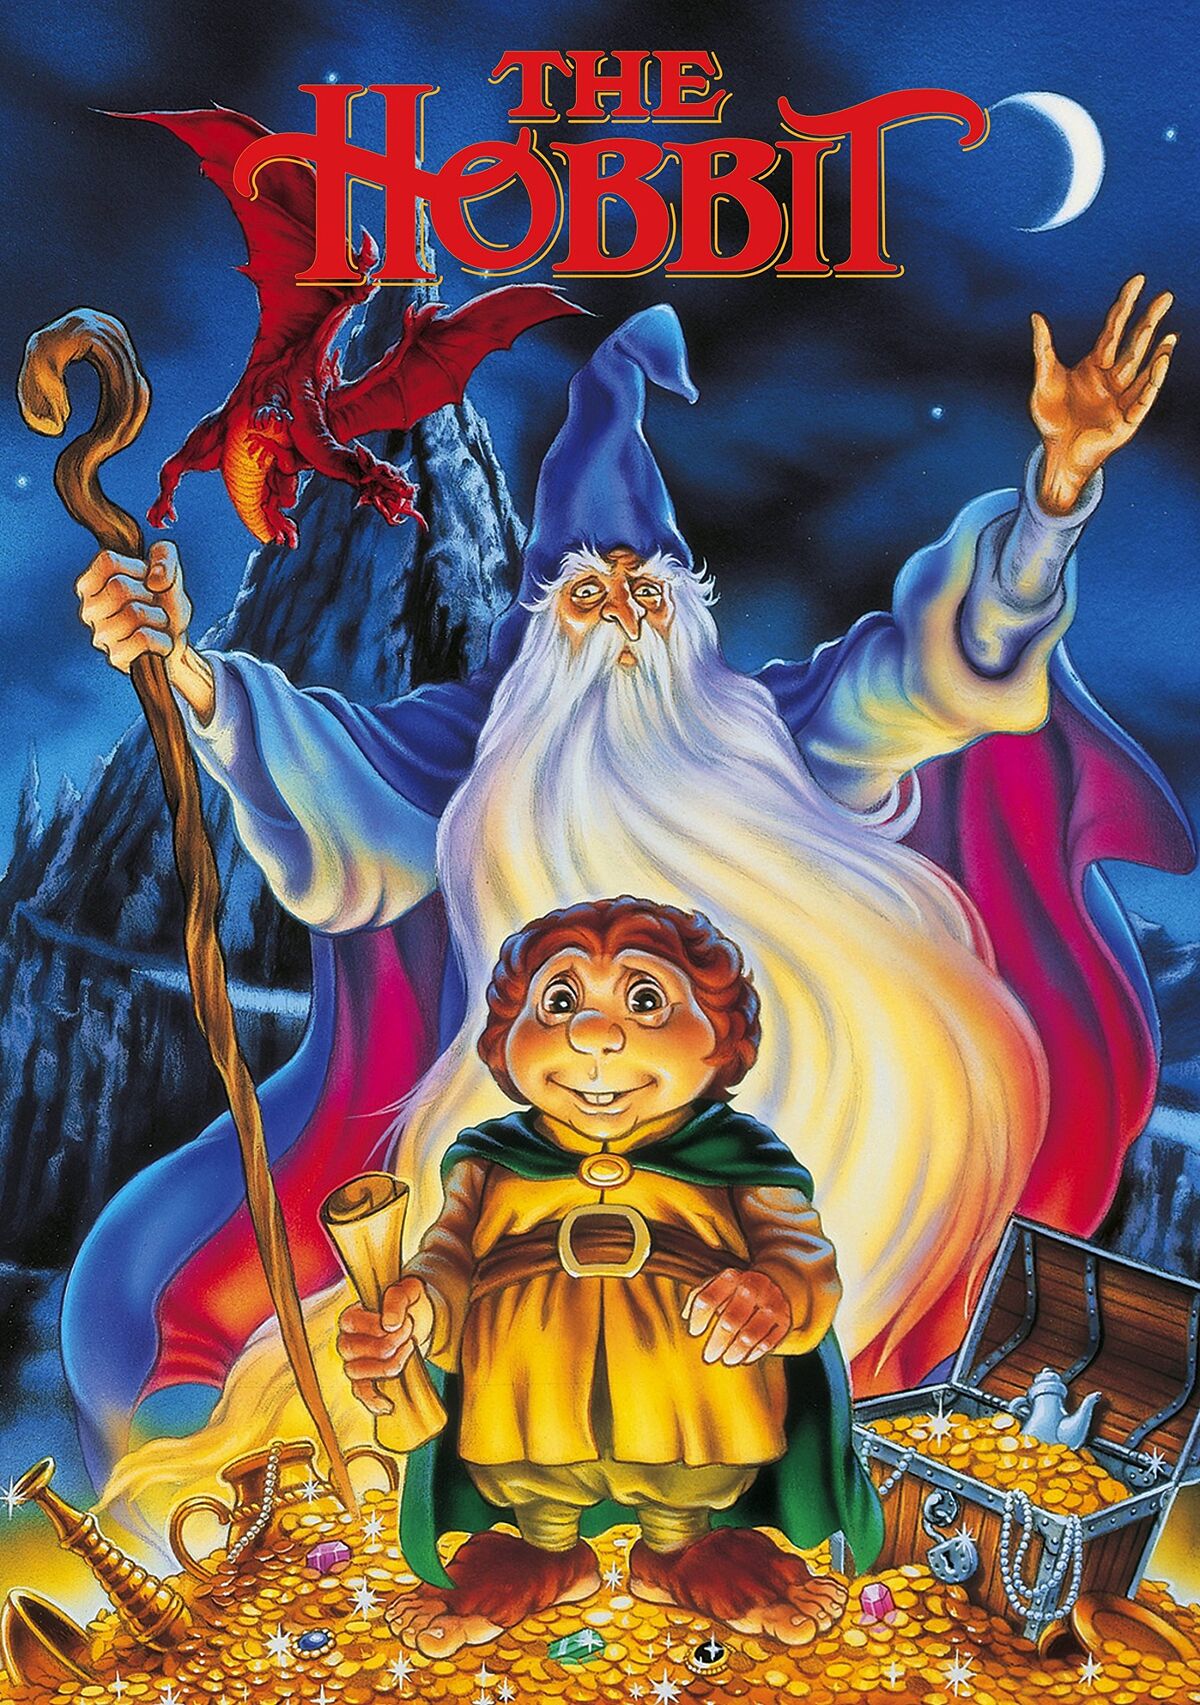 The Lord of the Rings (1978) - IMDb